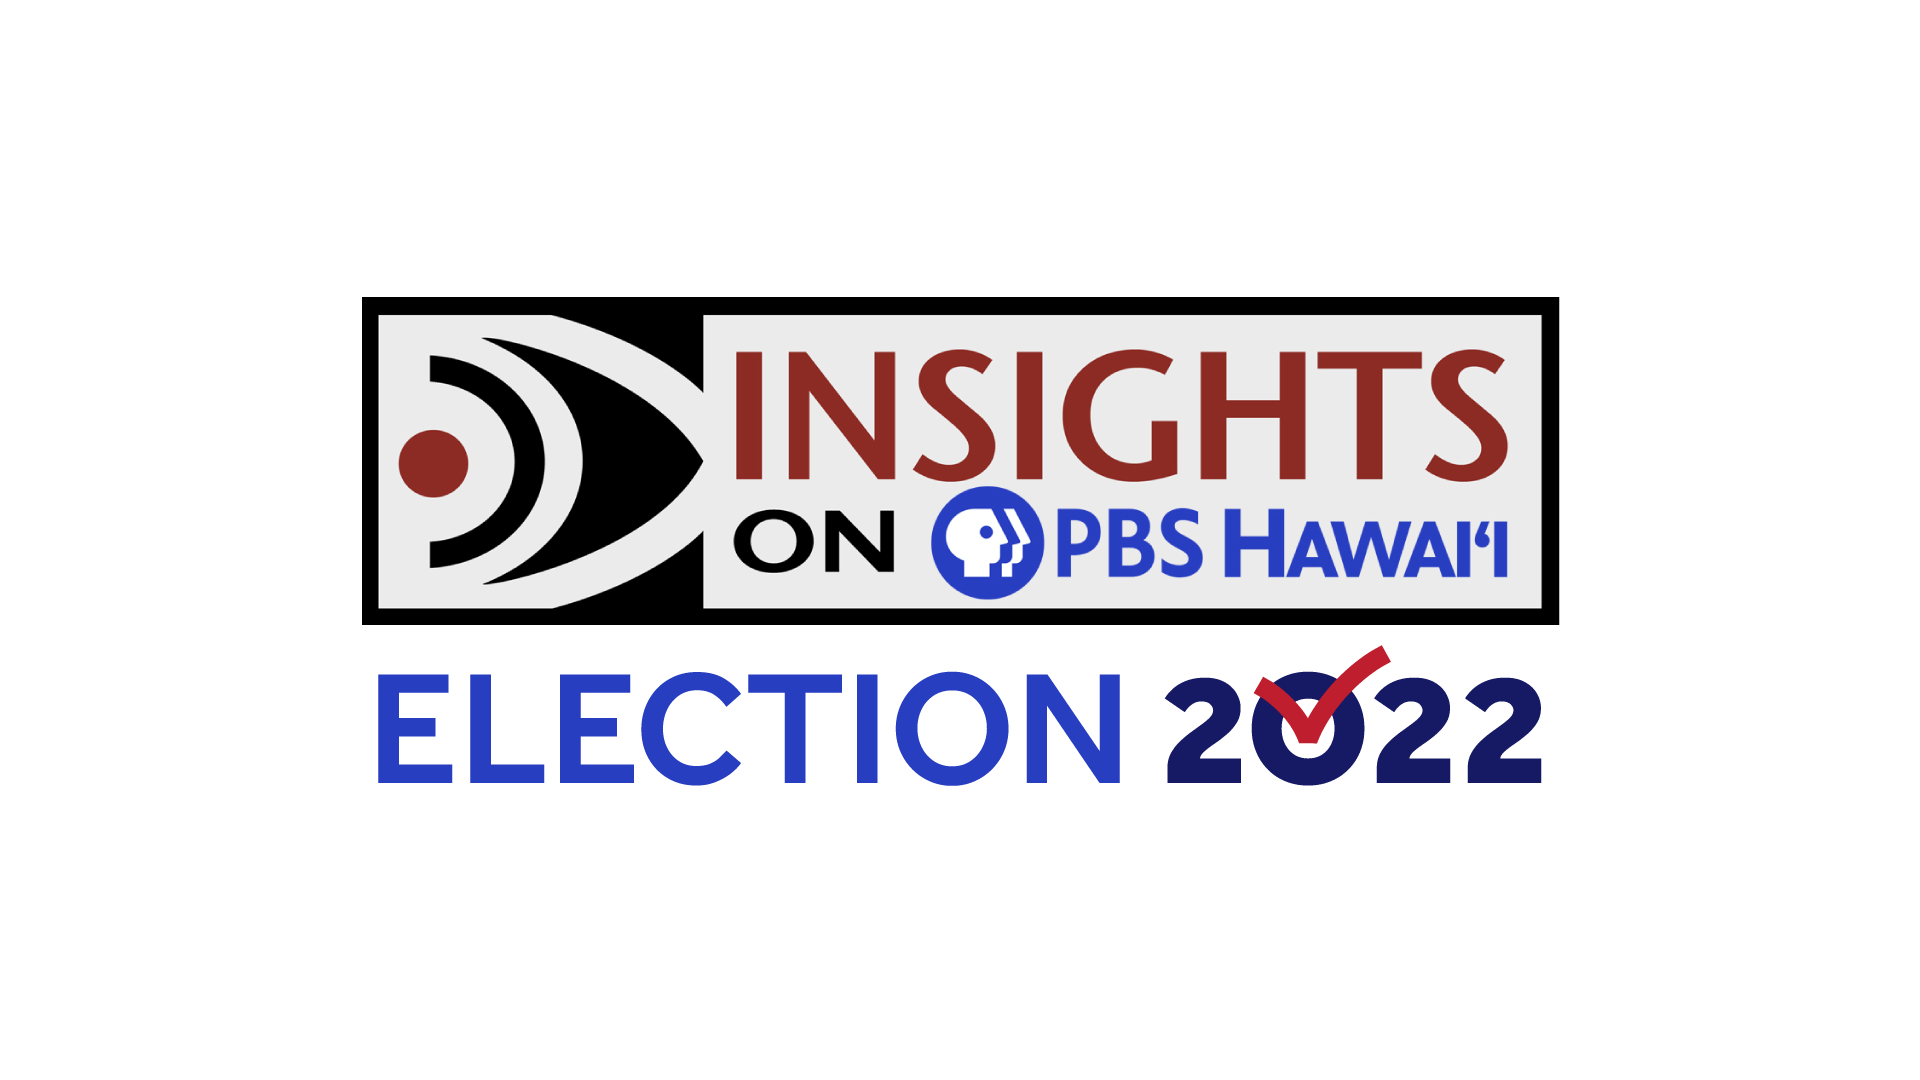 Election 2022 <br/>CANDIDATES: JULY 7 BROADCAST <br/>INSIGHTS ON PBS HAWAIʻI